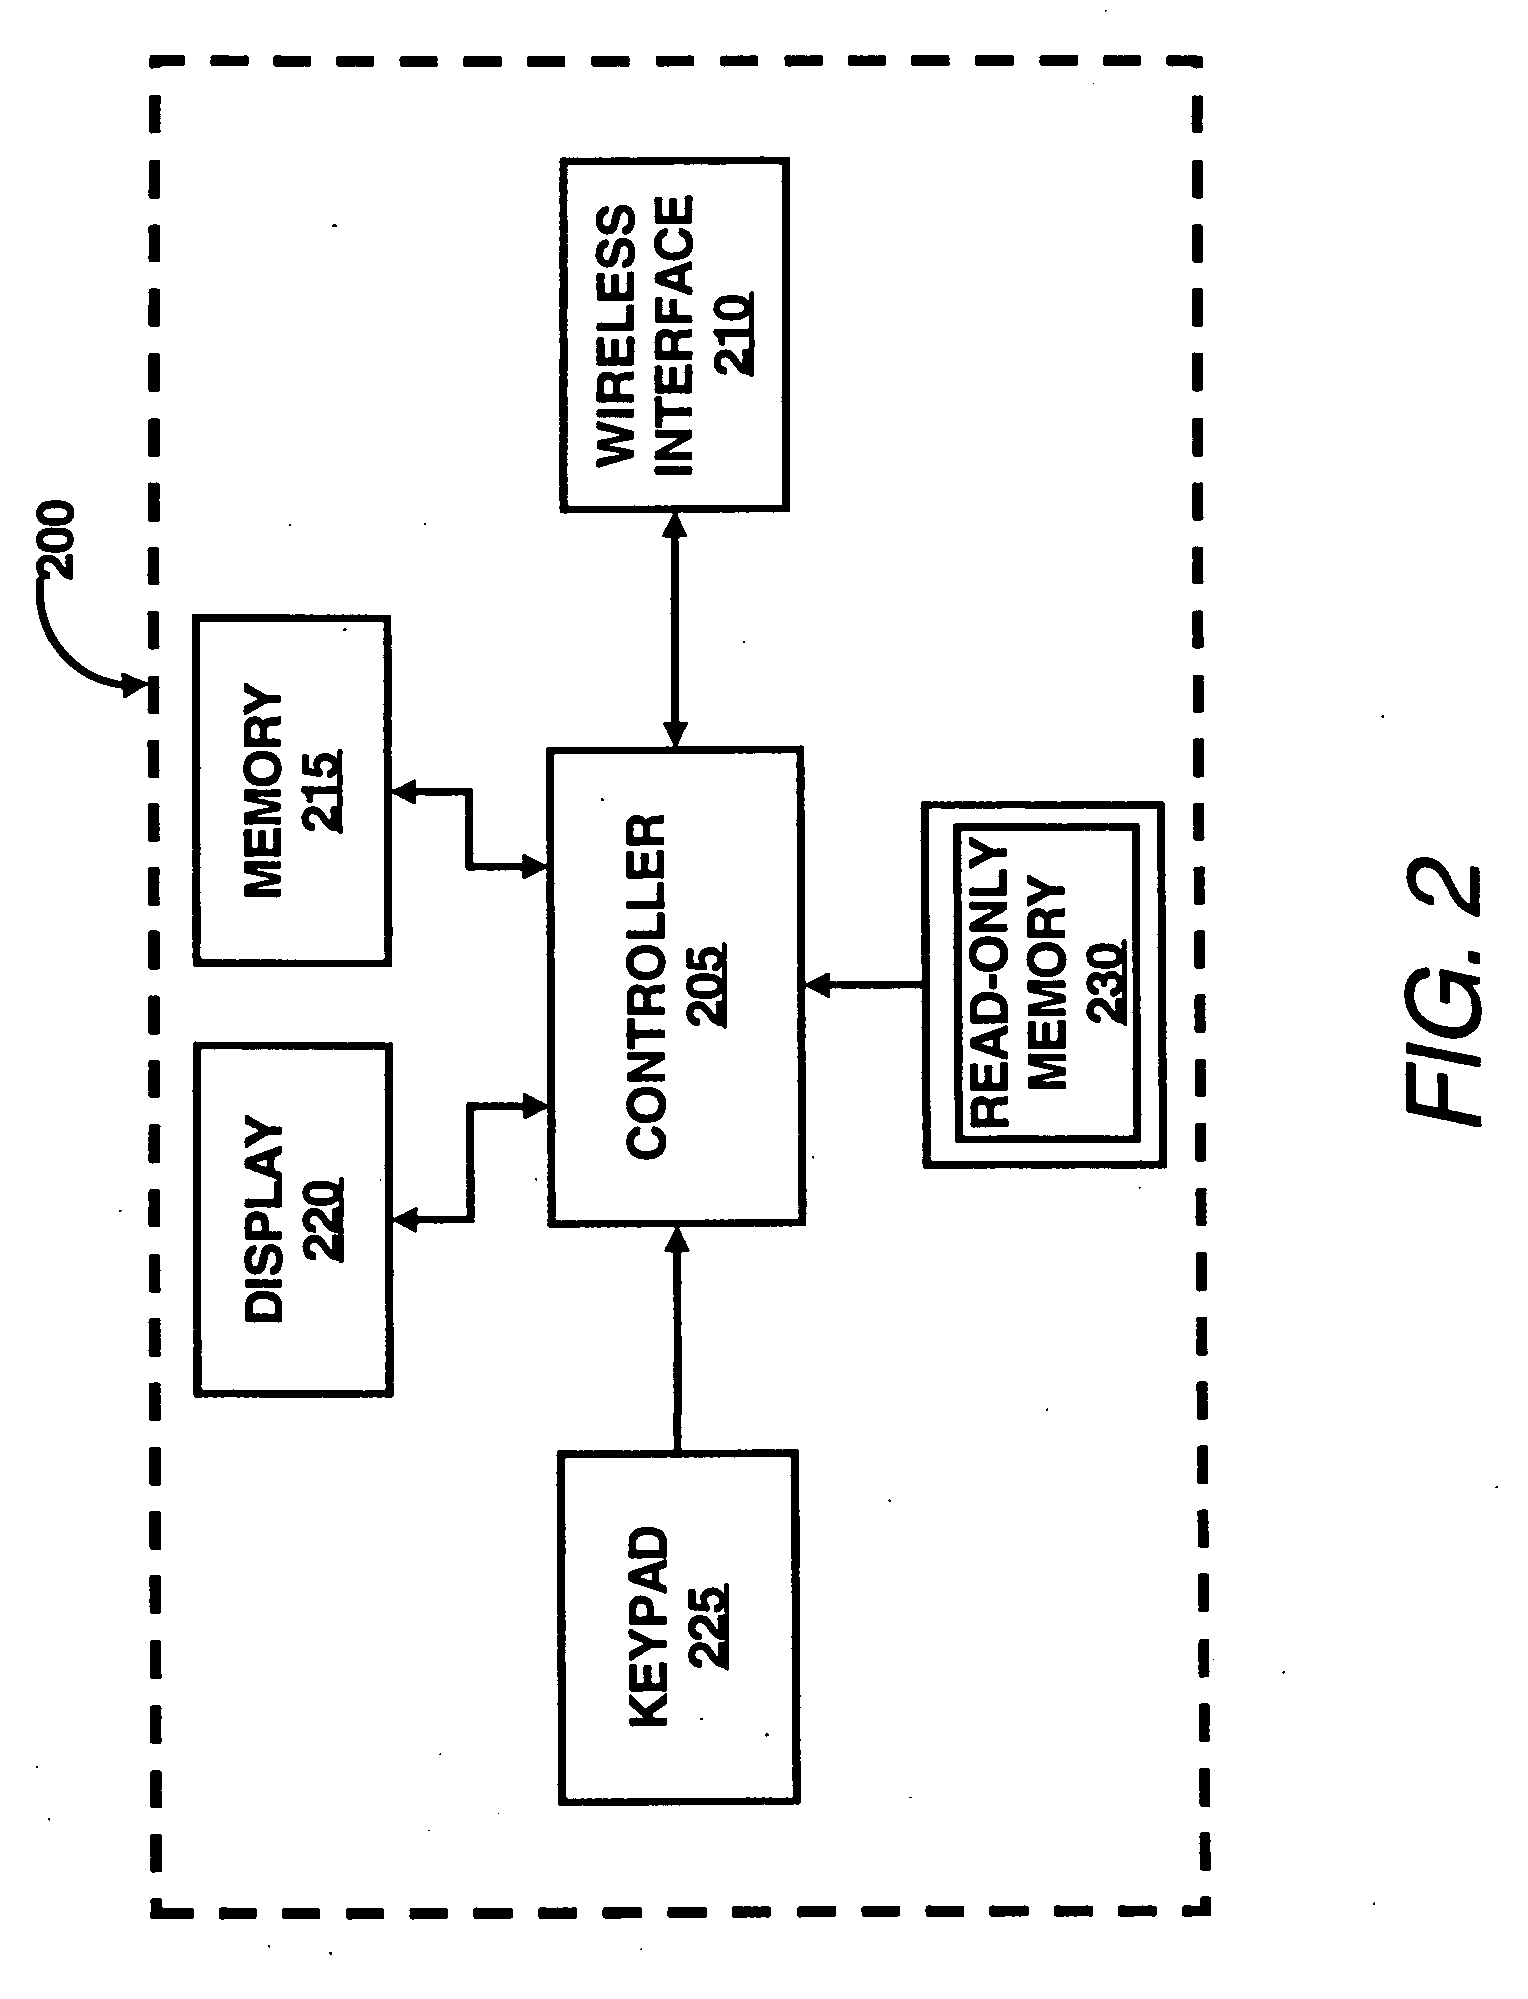 Method and apparatus for storing real-time text messages